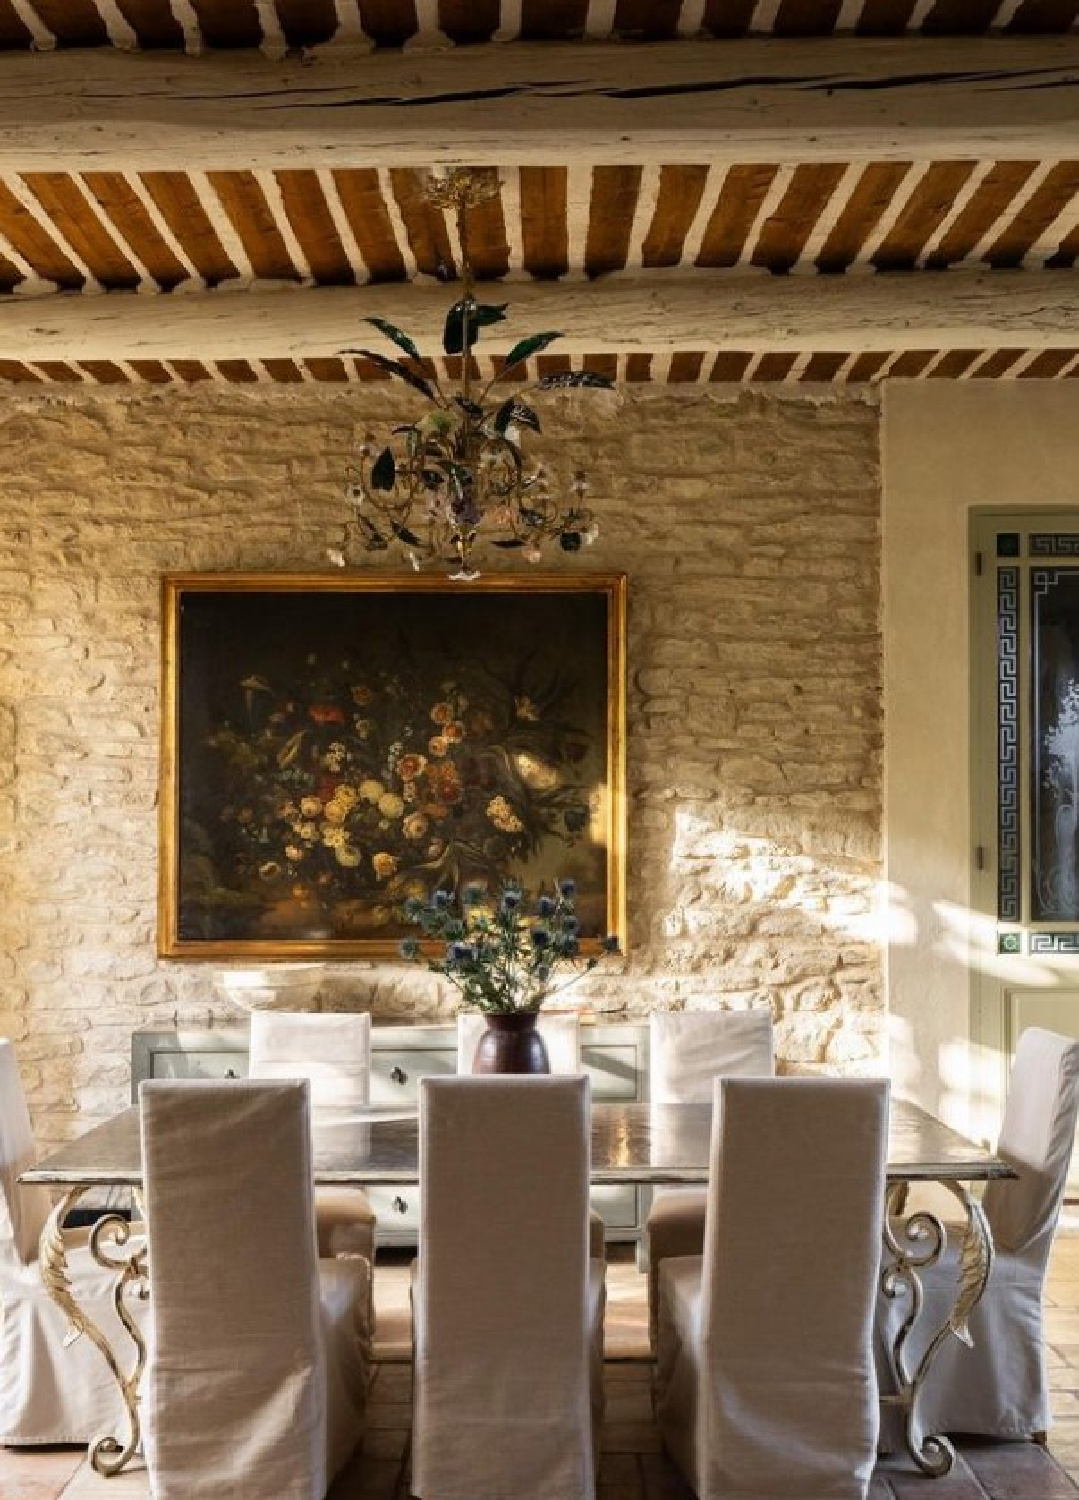 French country dining room. Warm European luxury and cozy opulence in a French vacation villa in Provence - La Bastide de Laurence. #frenchbastide #frenchvilla #luxuryvilla #provencevilla #warmeuropeanluxury #cozyopulence #provencehomes #frenchcountryinterior